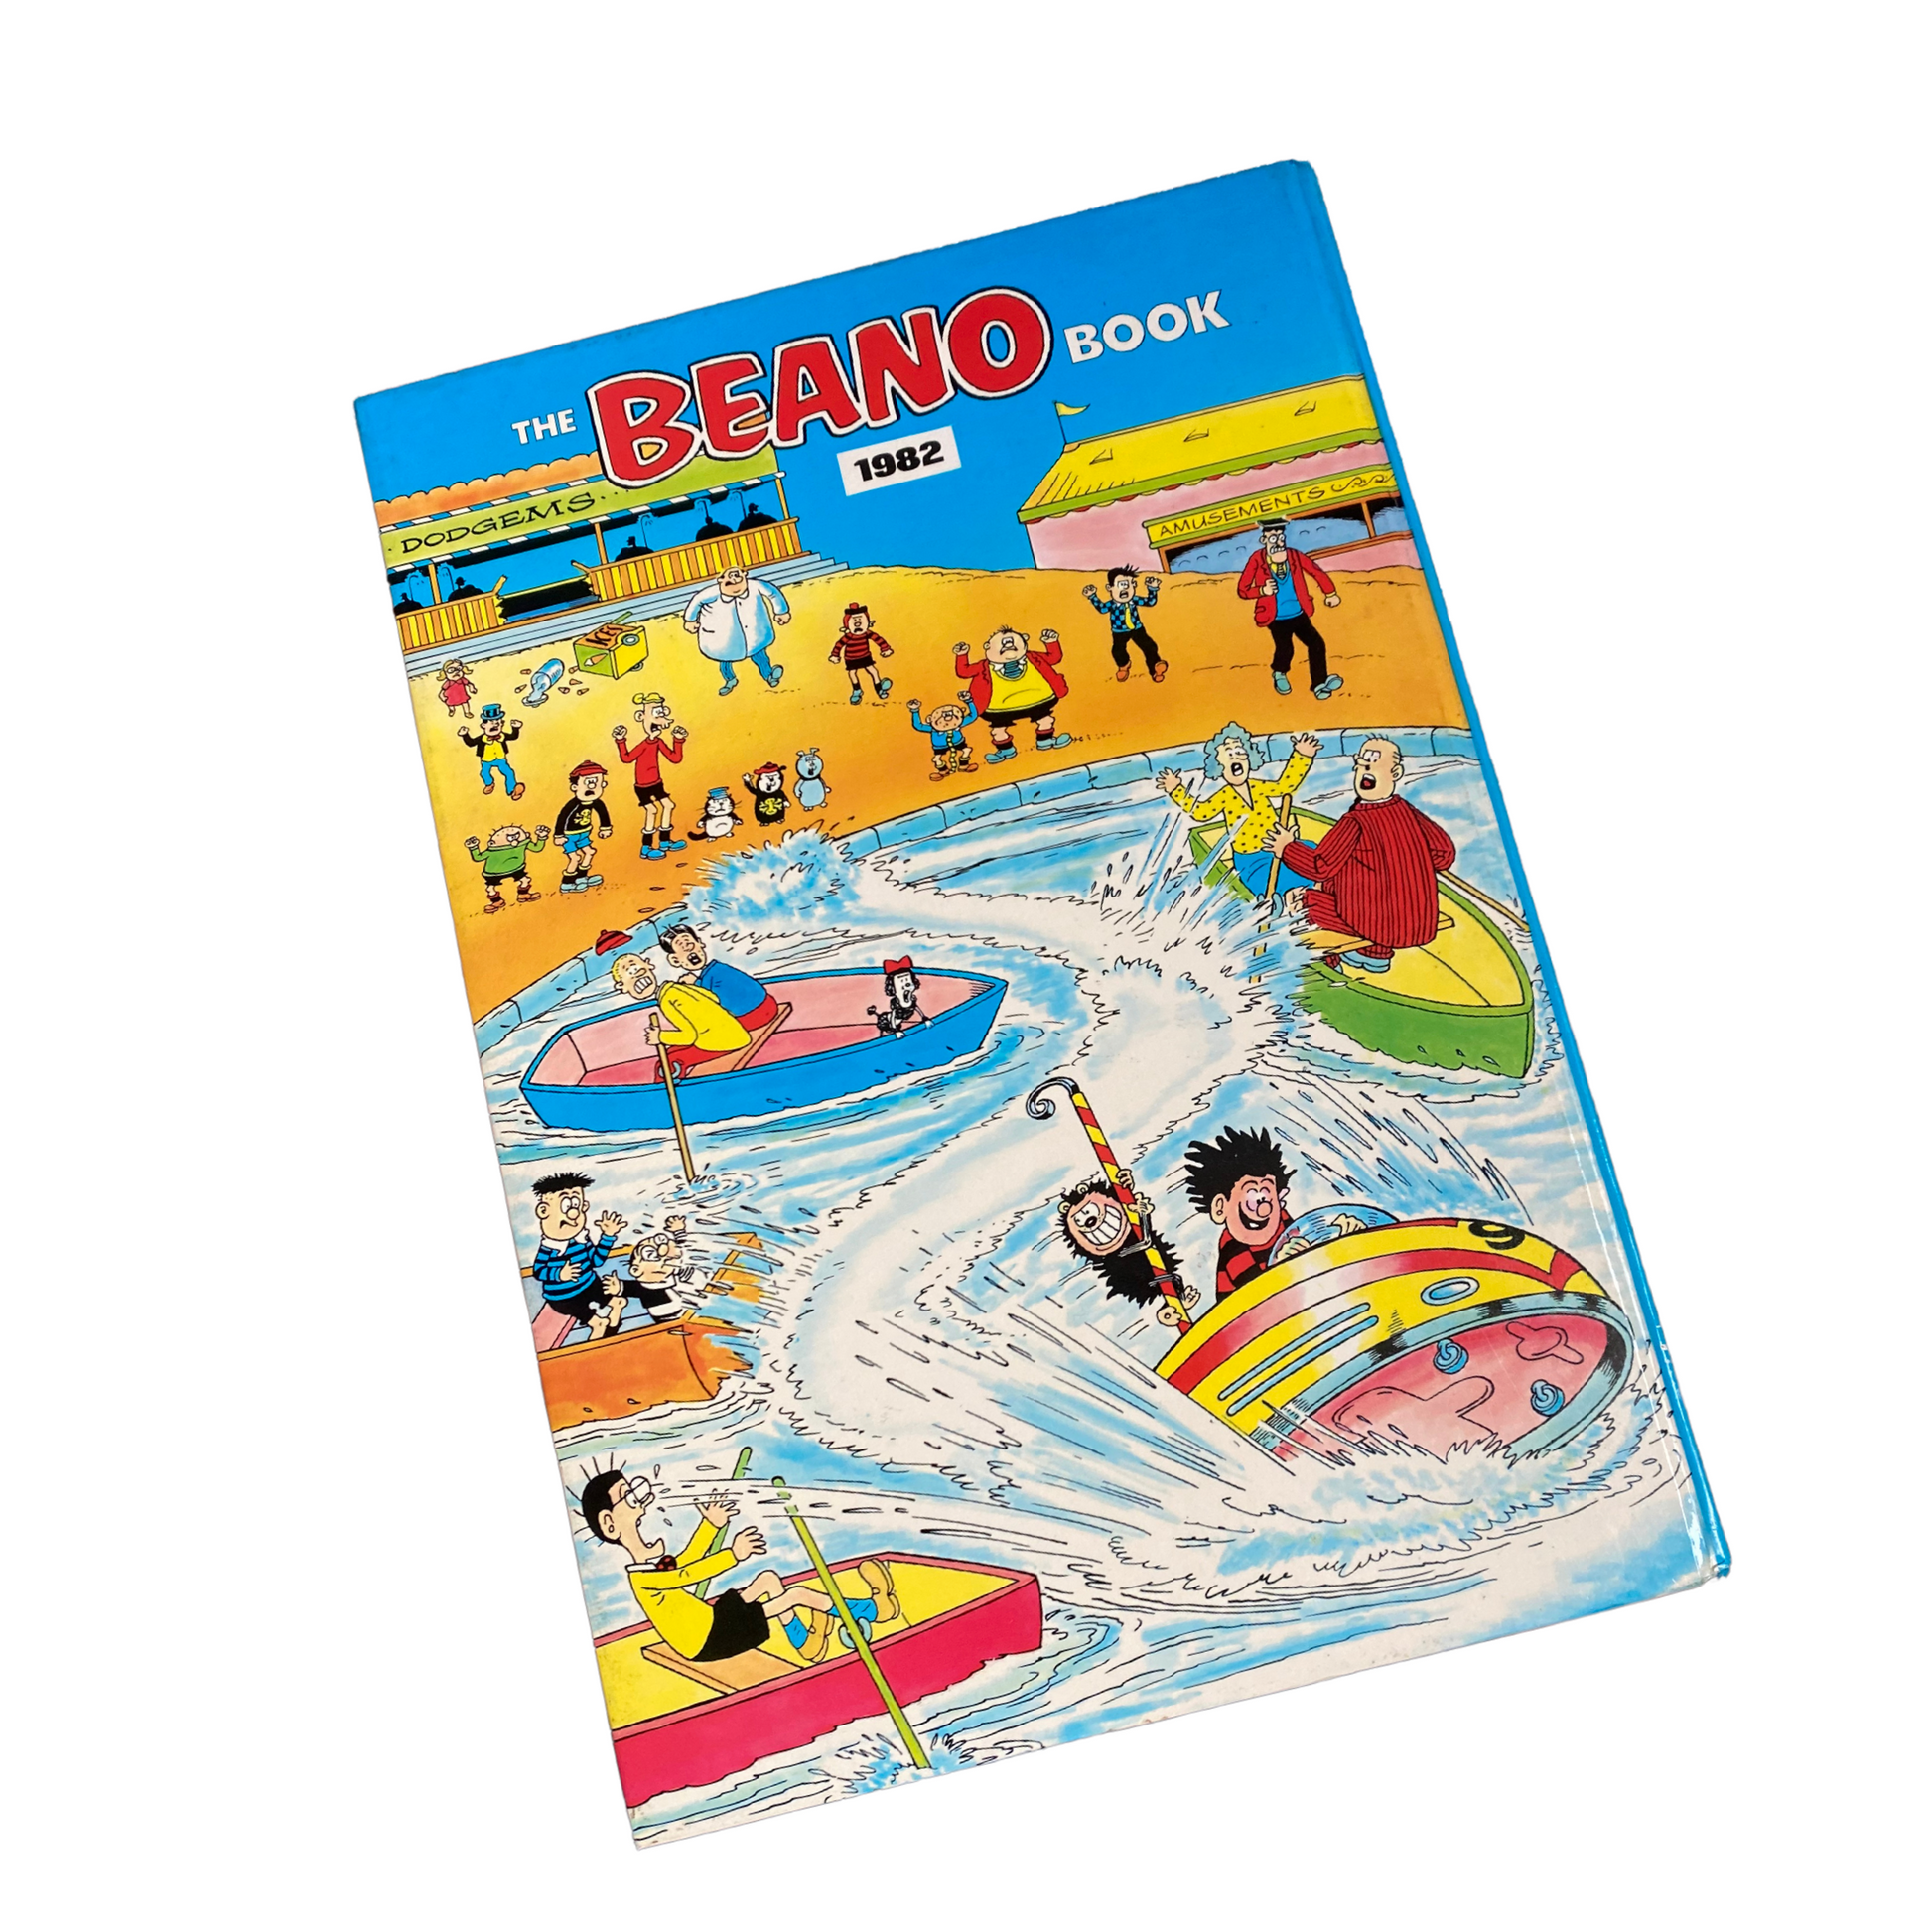 Beano 1982 book back cover view 